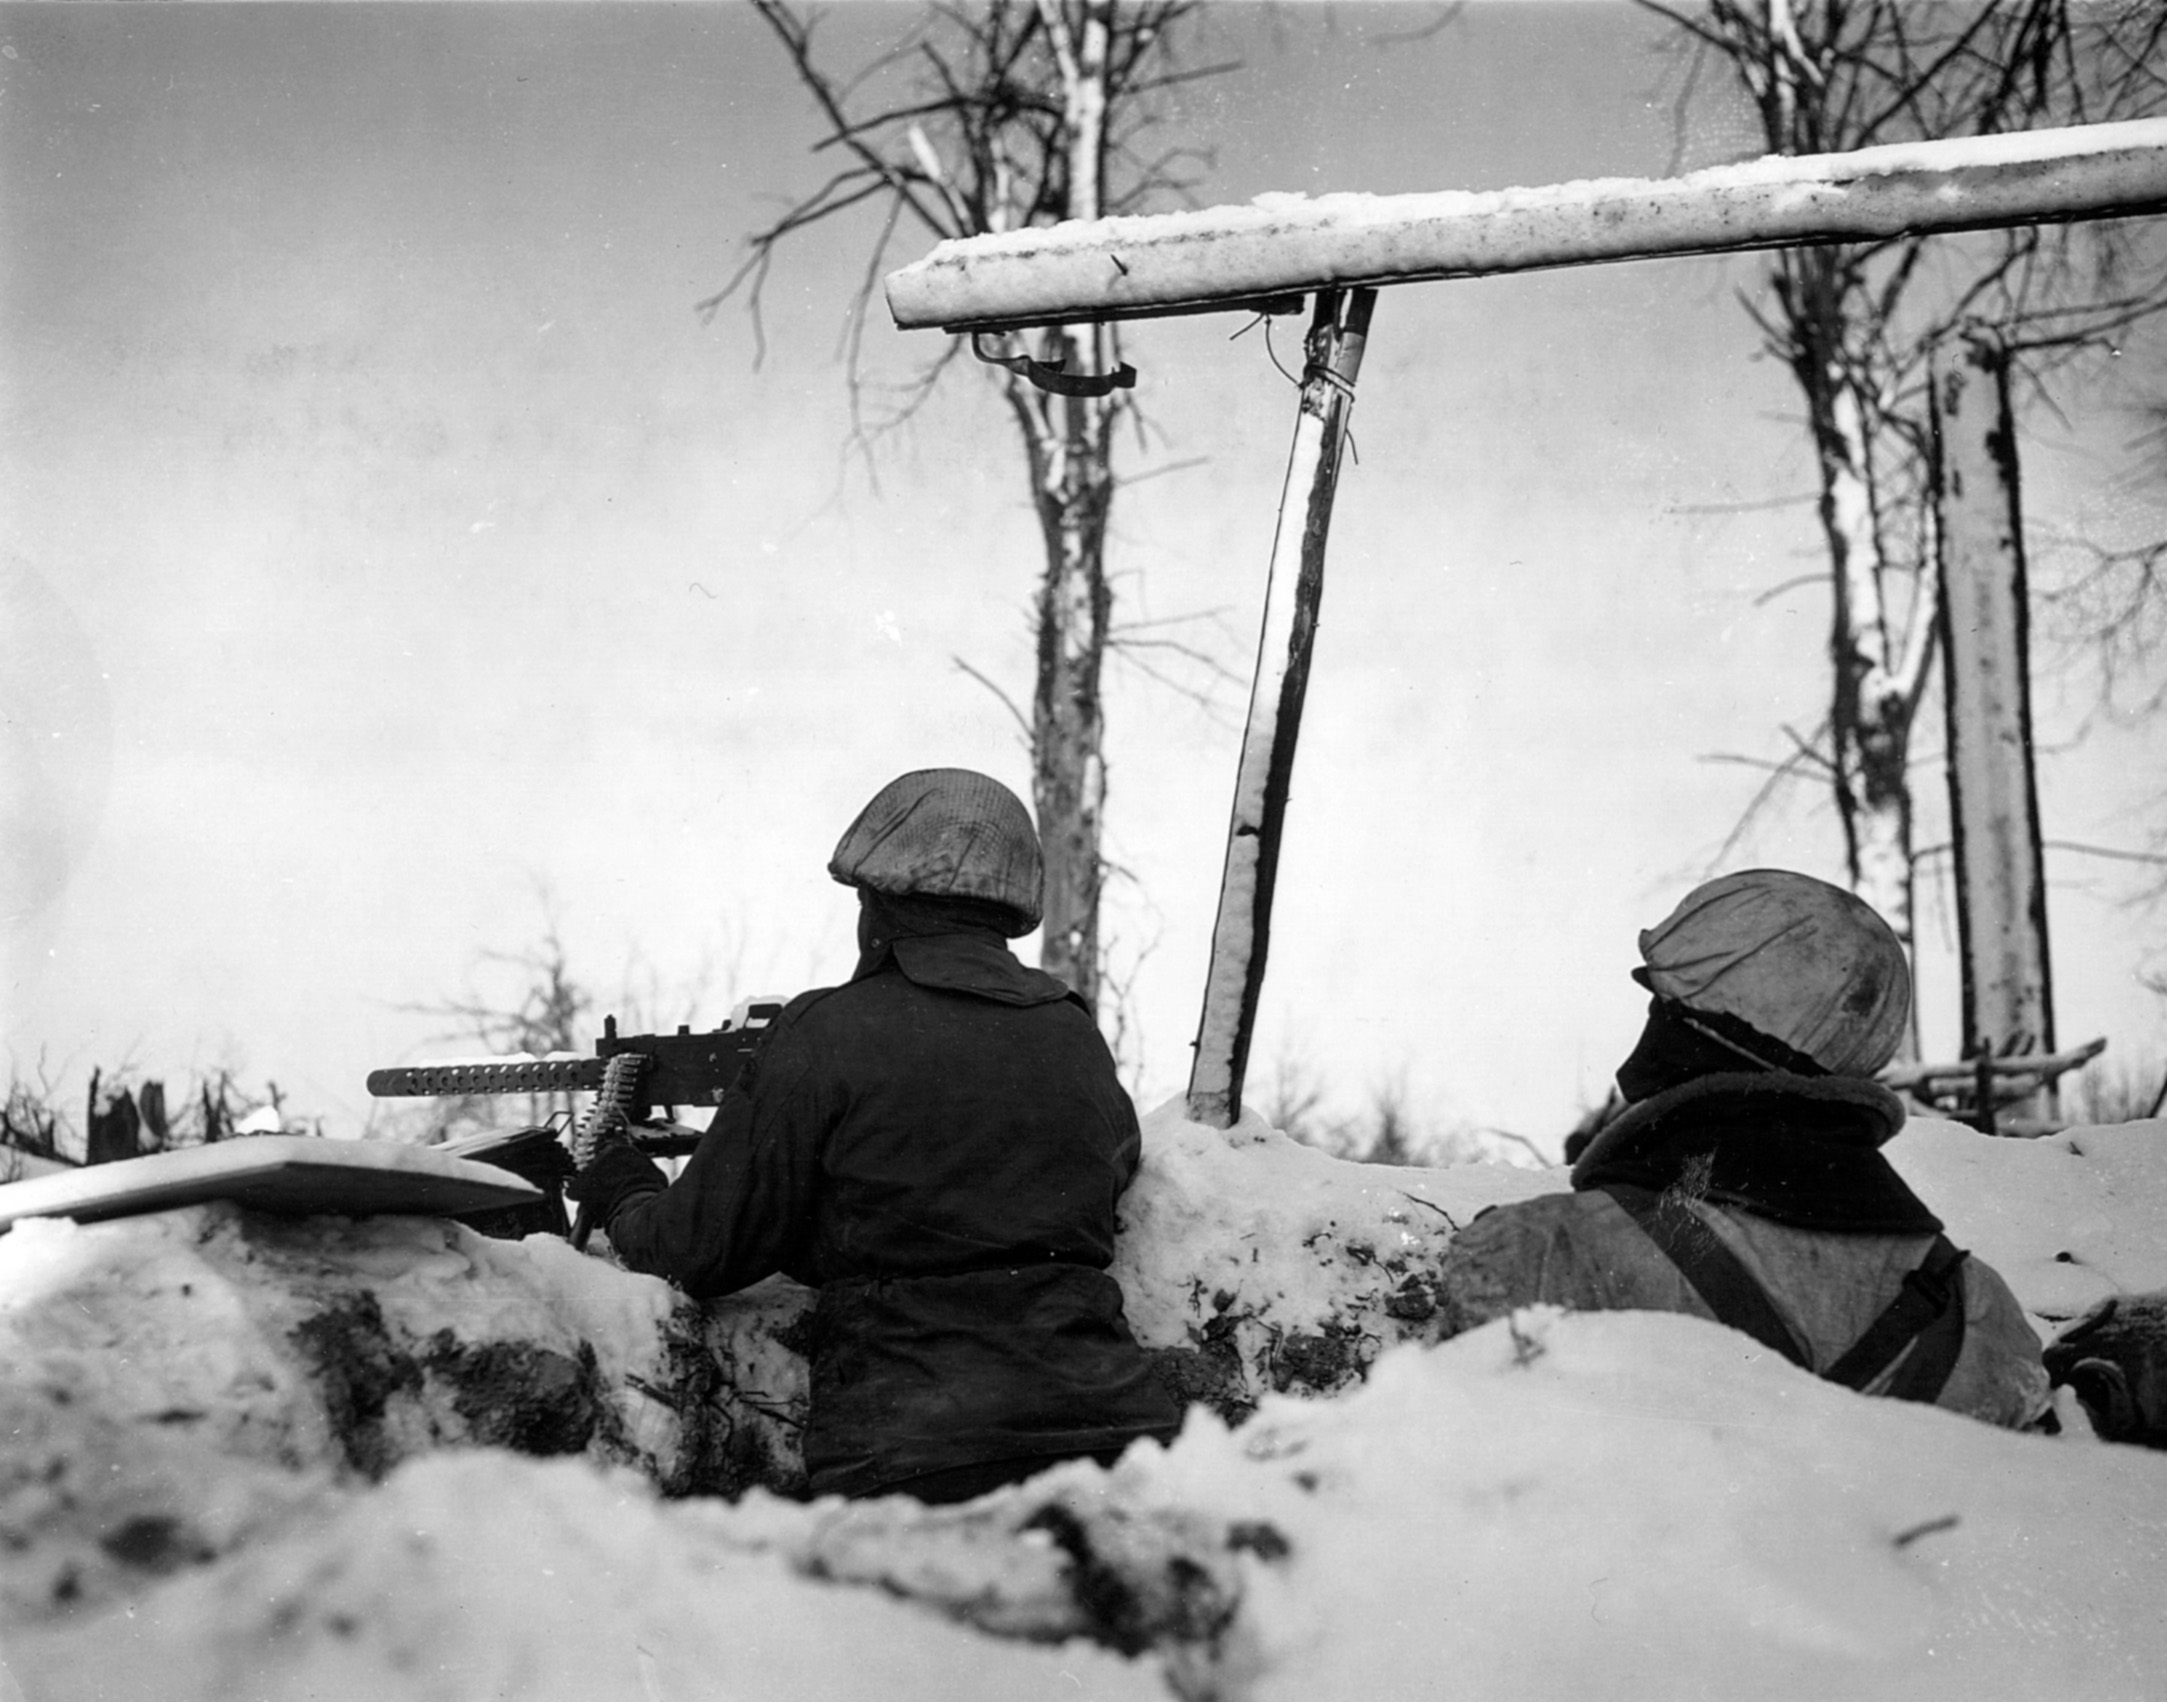 Camouflaged to blend into the winter landscape, two soldiers of the 7th Armored Division defend a roadblock near St. Vith on January 24, 1945.